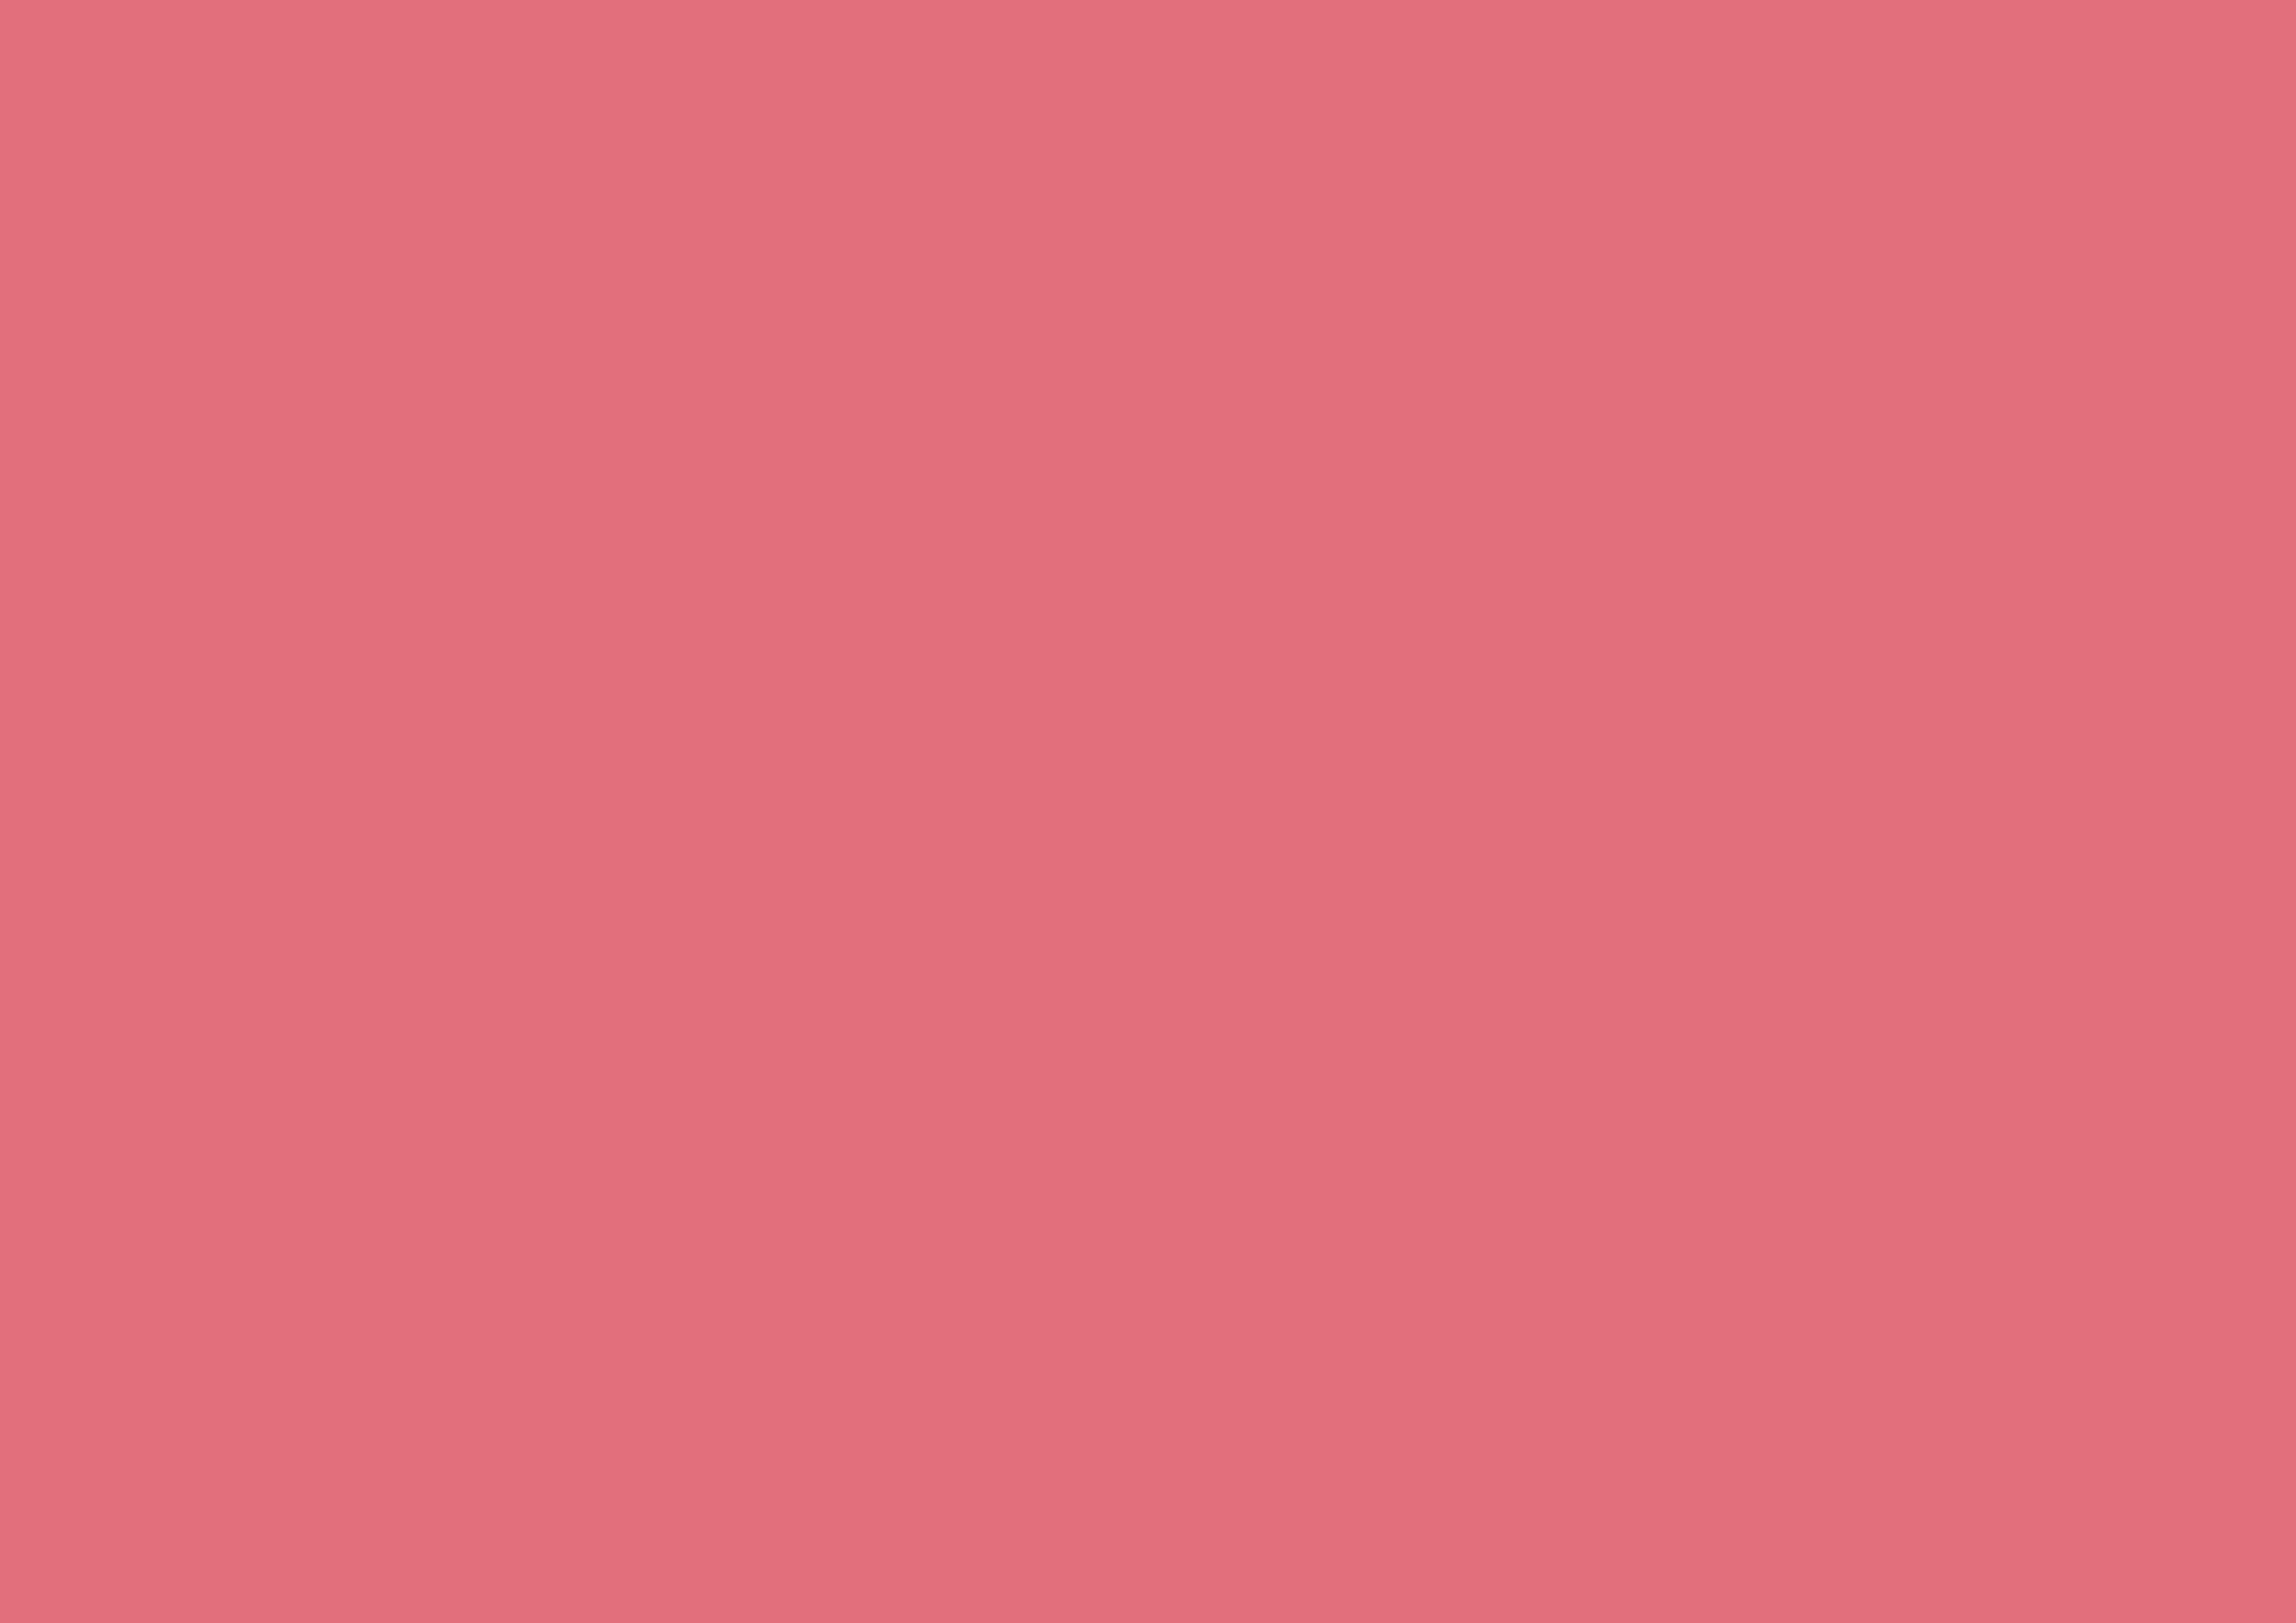 3508x2480 Candy Pink Solid Color Background